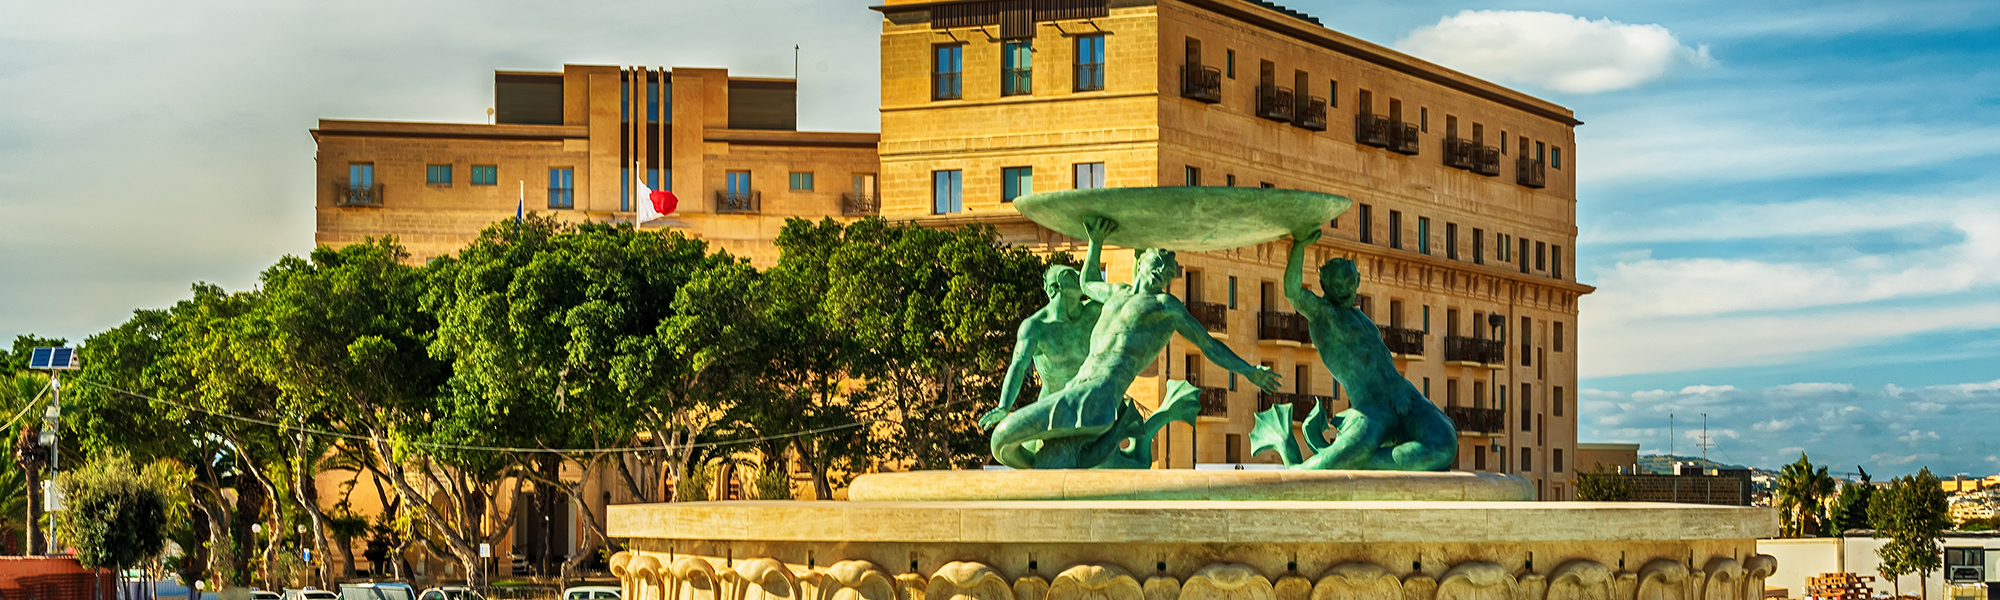 Malta - the Triton Fountain, trees and building in the background